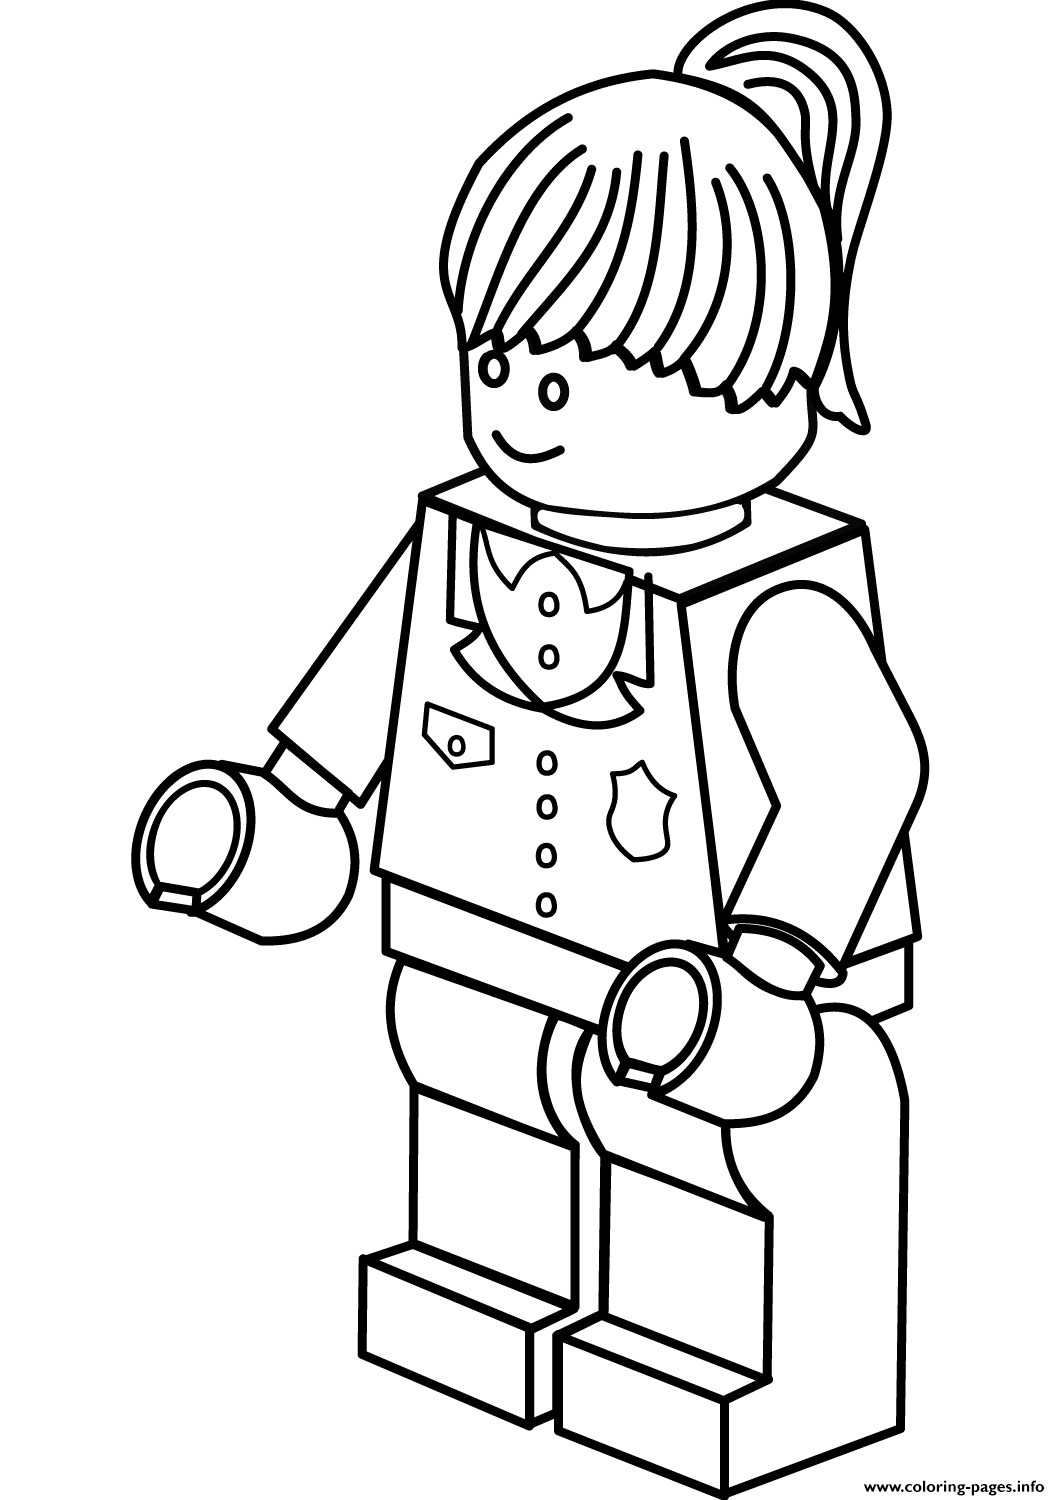 Lego Police Woman coloring